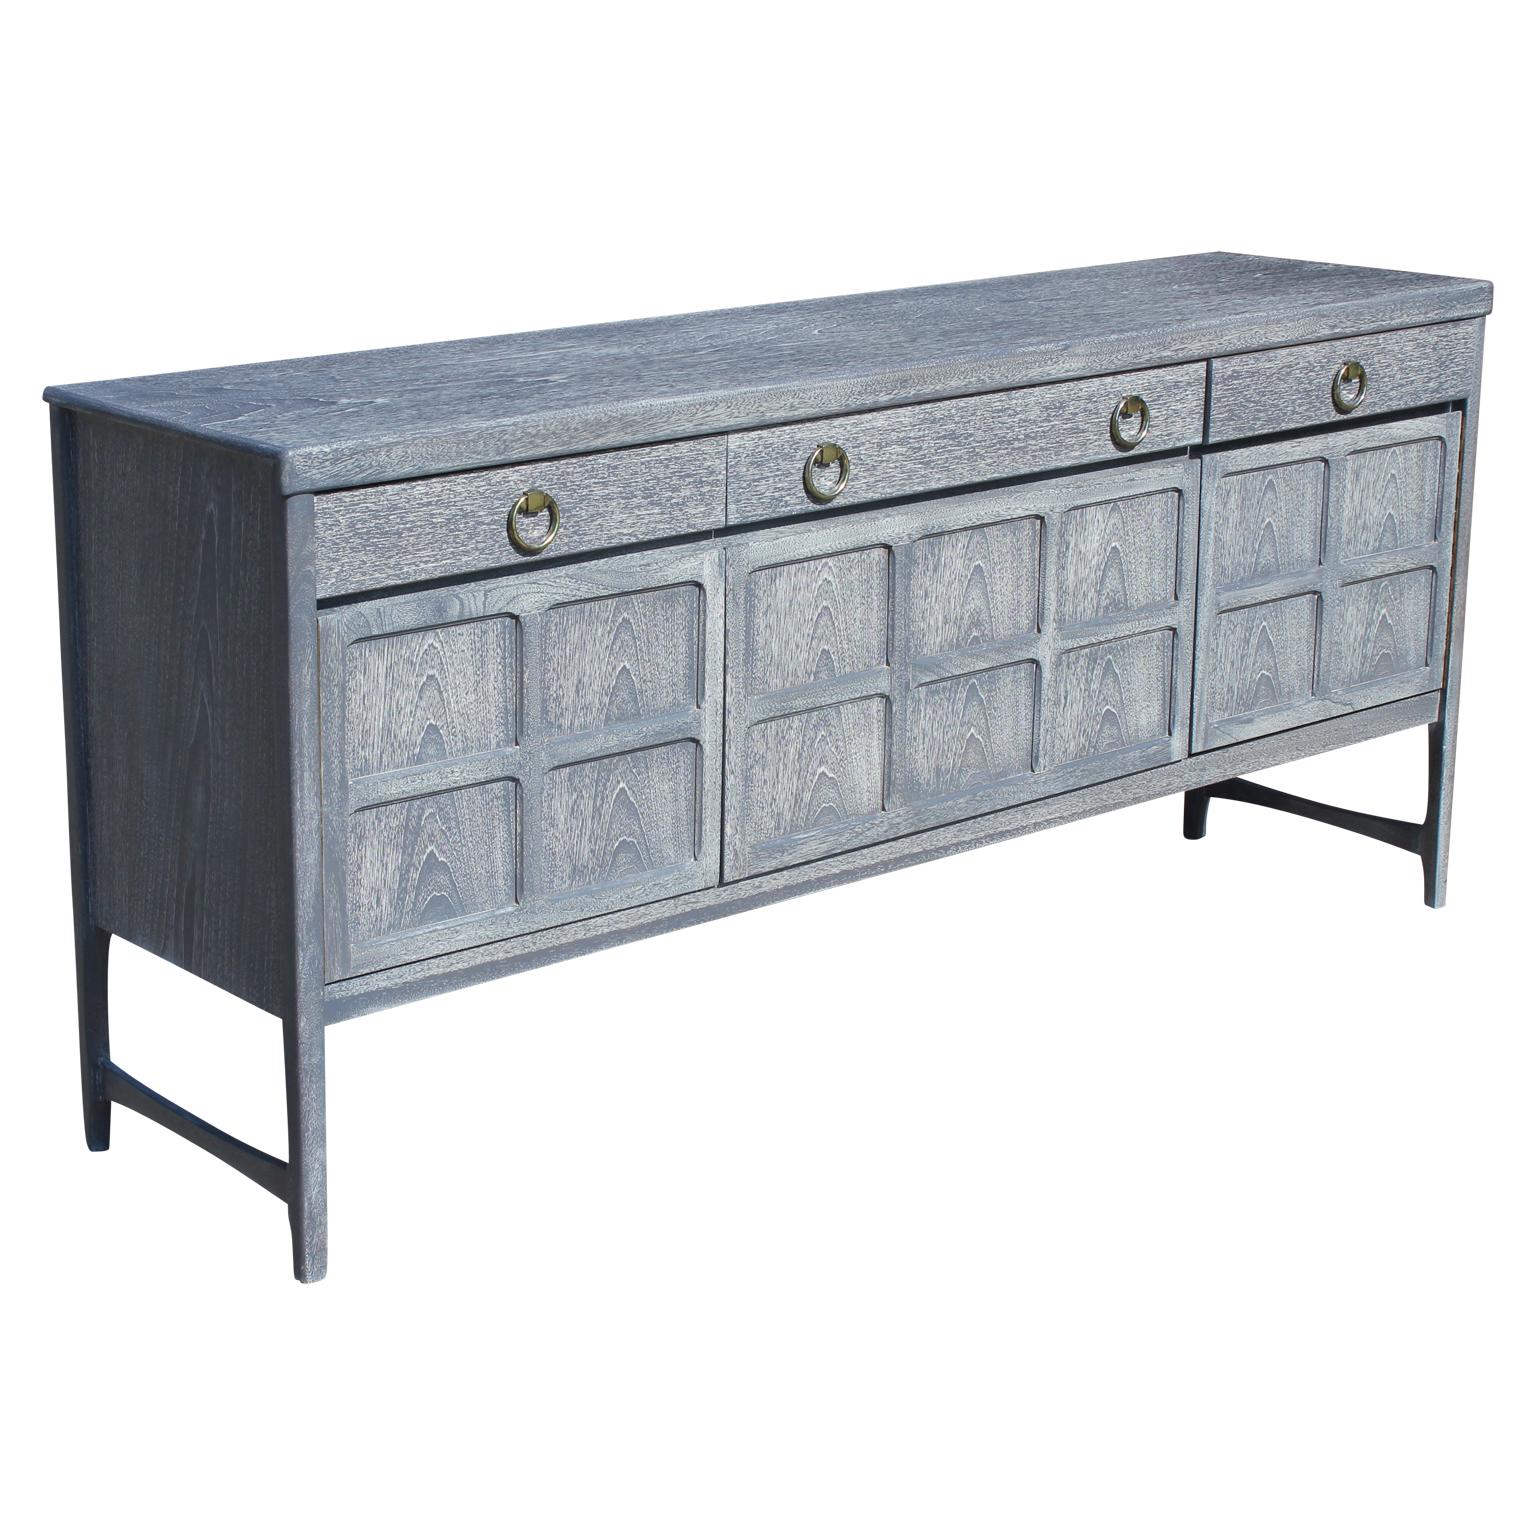 English Modern Hollywood Regency Sideboard with a Grey Cerused Finish and Brass Hardware